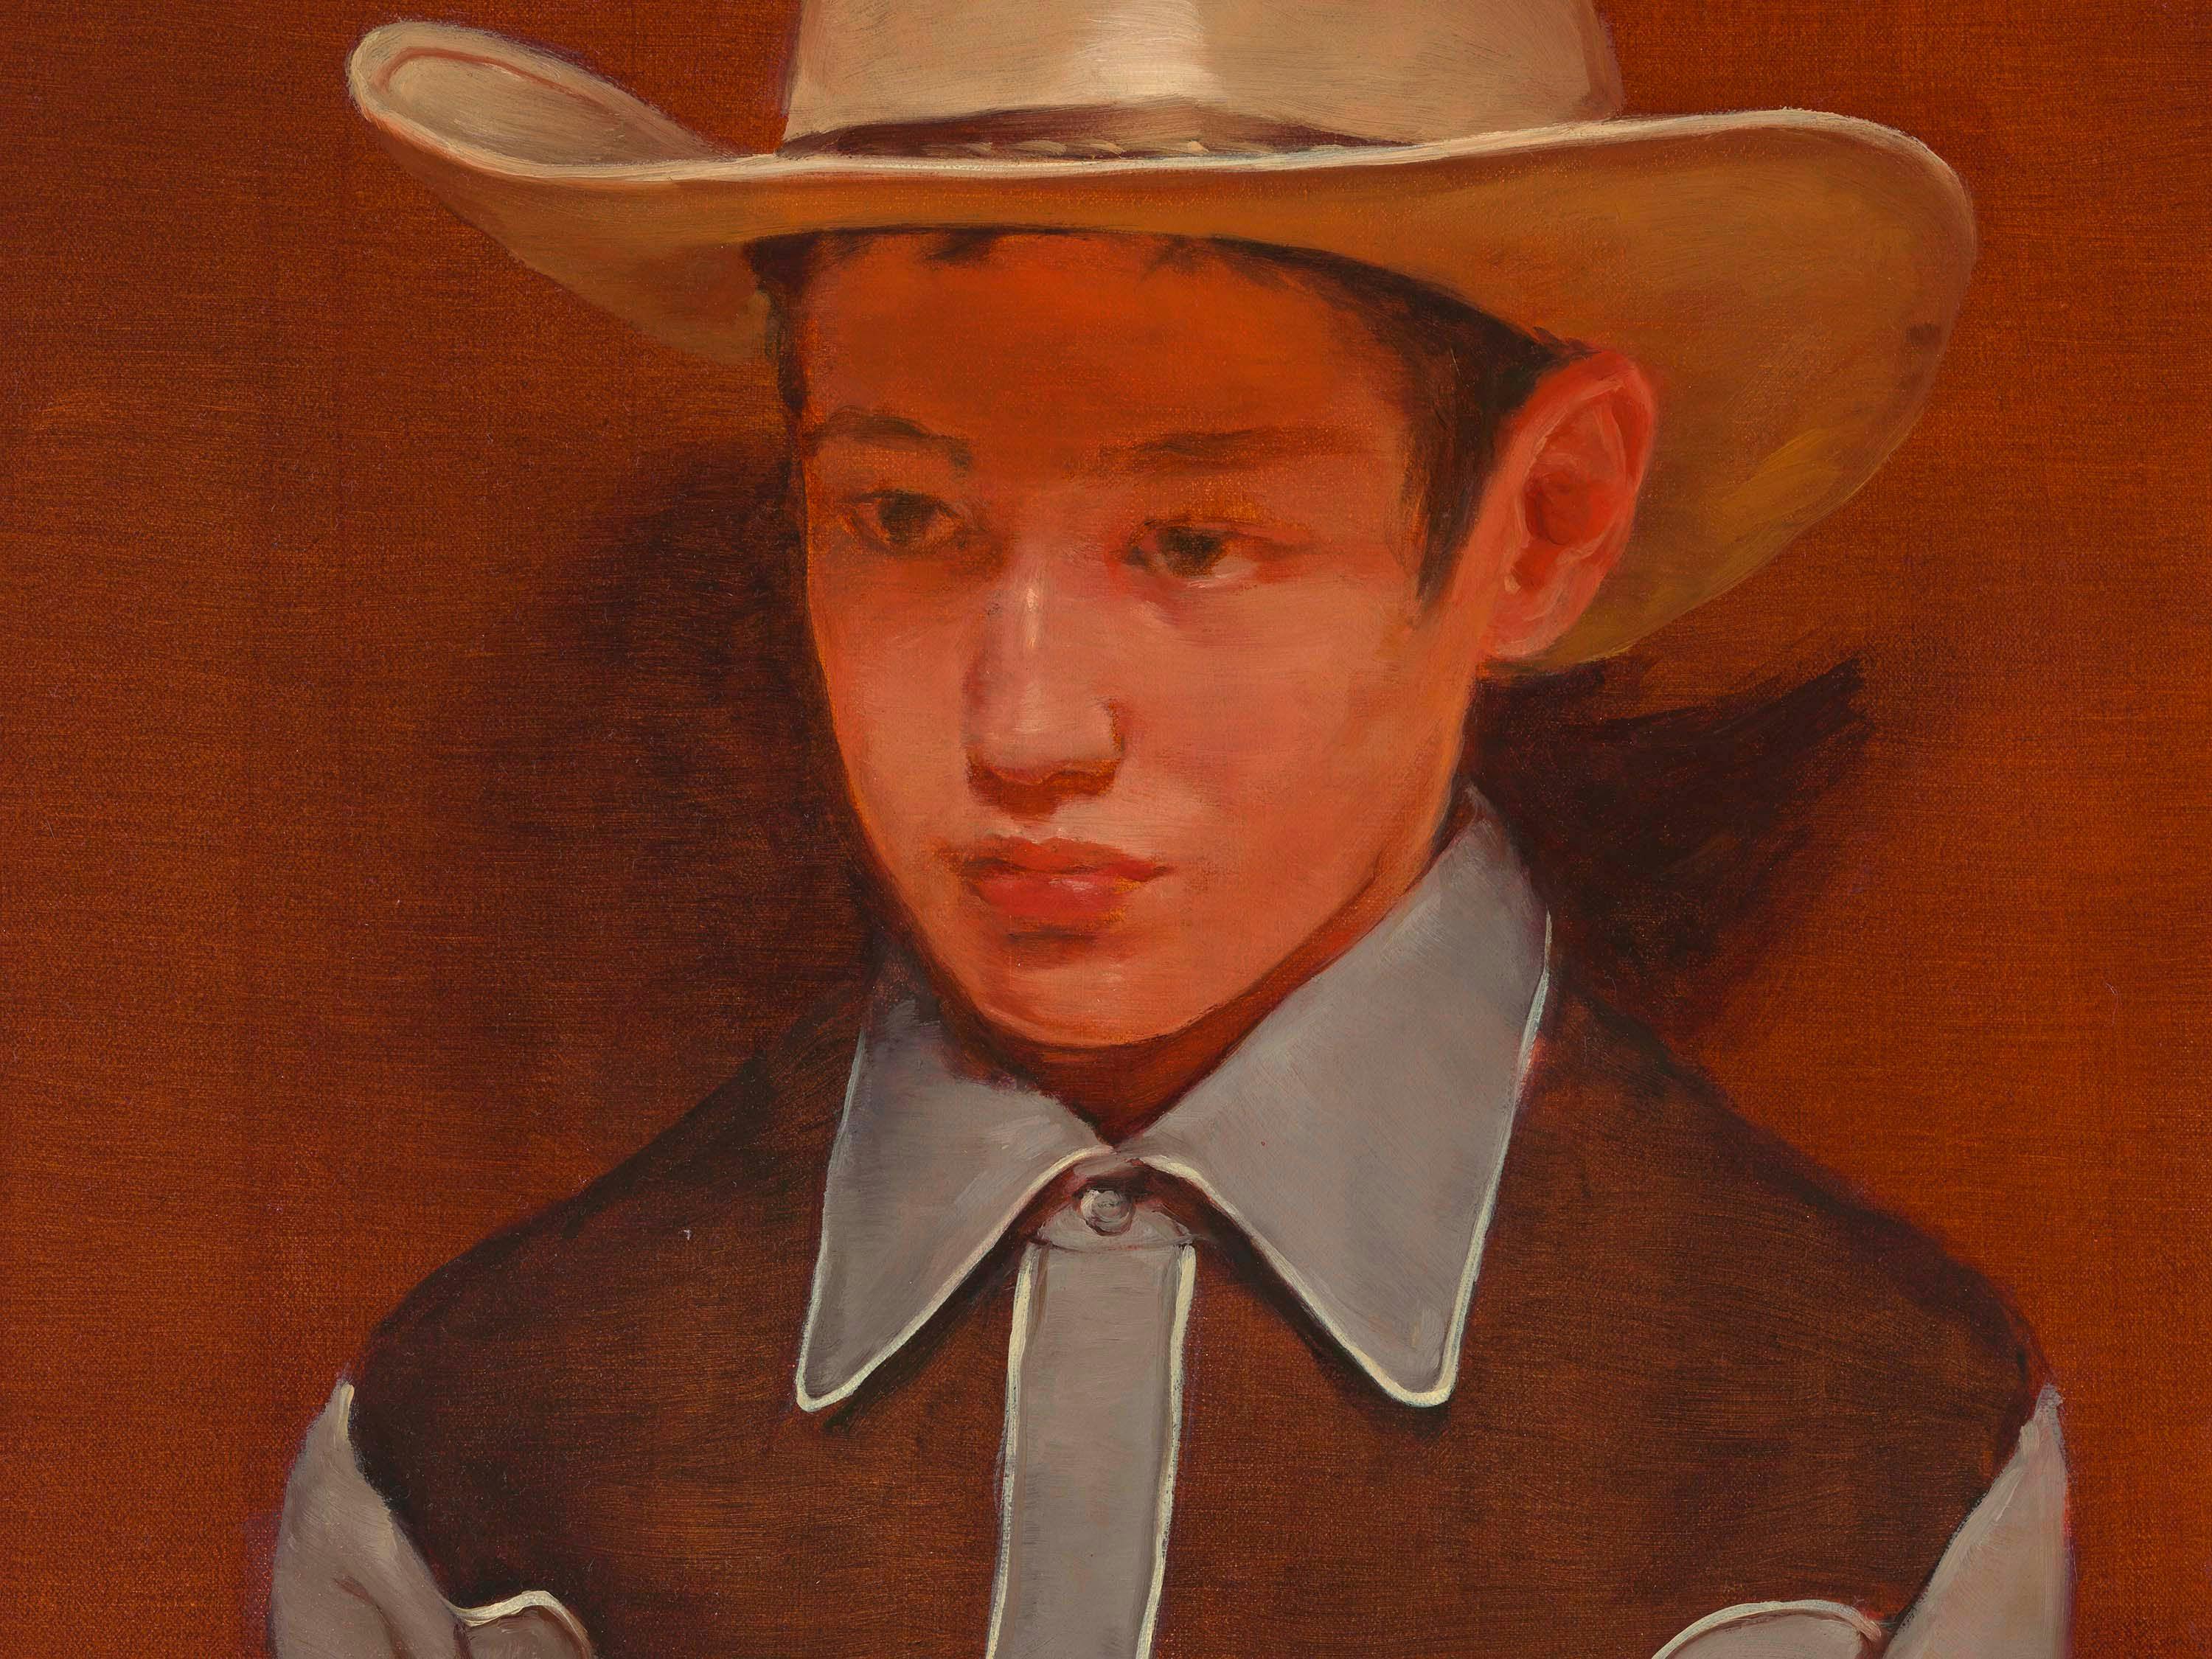 A detail from a painting by Michaël Borremans, titled The Talent, dated 2023.